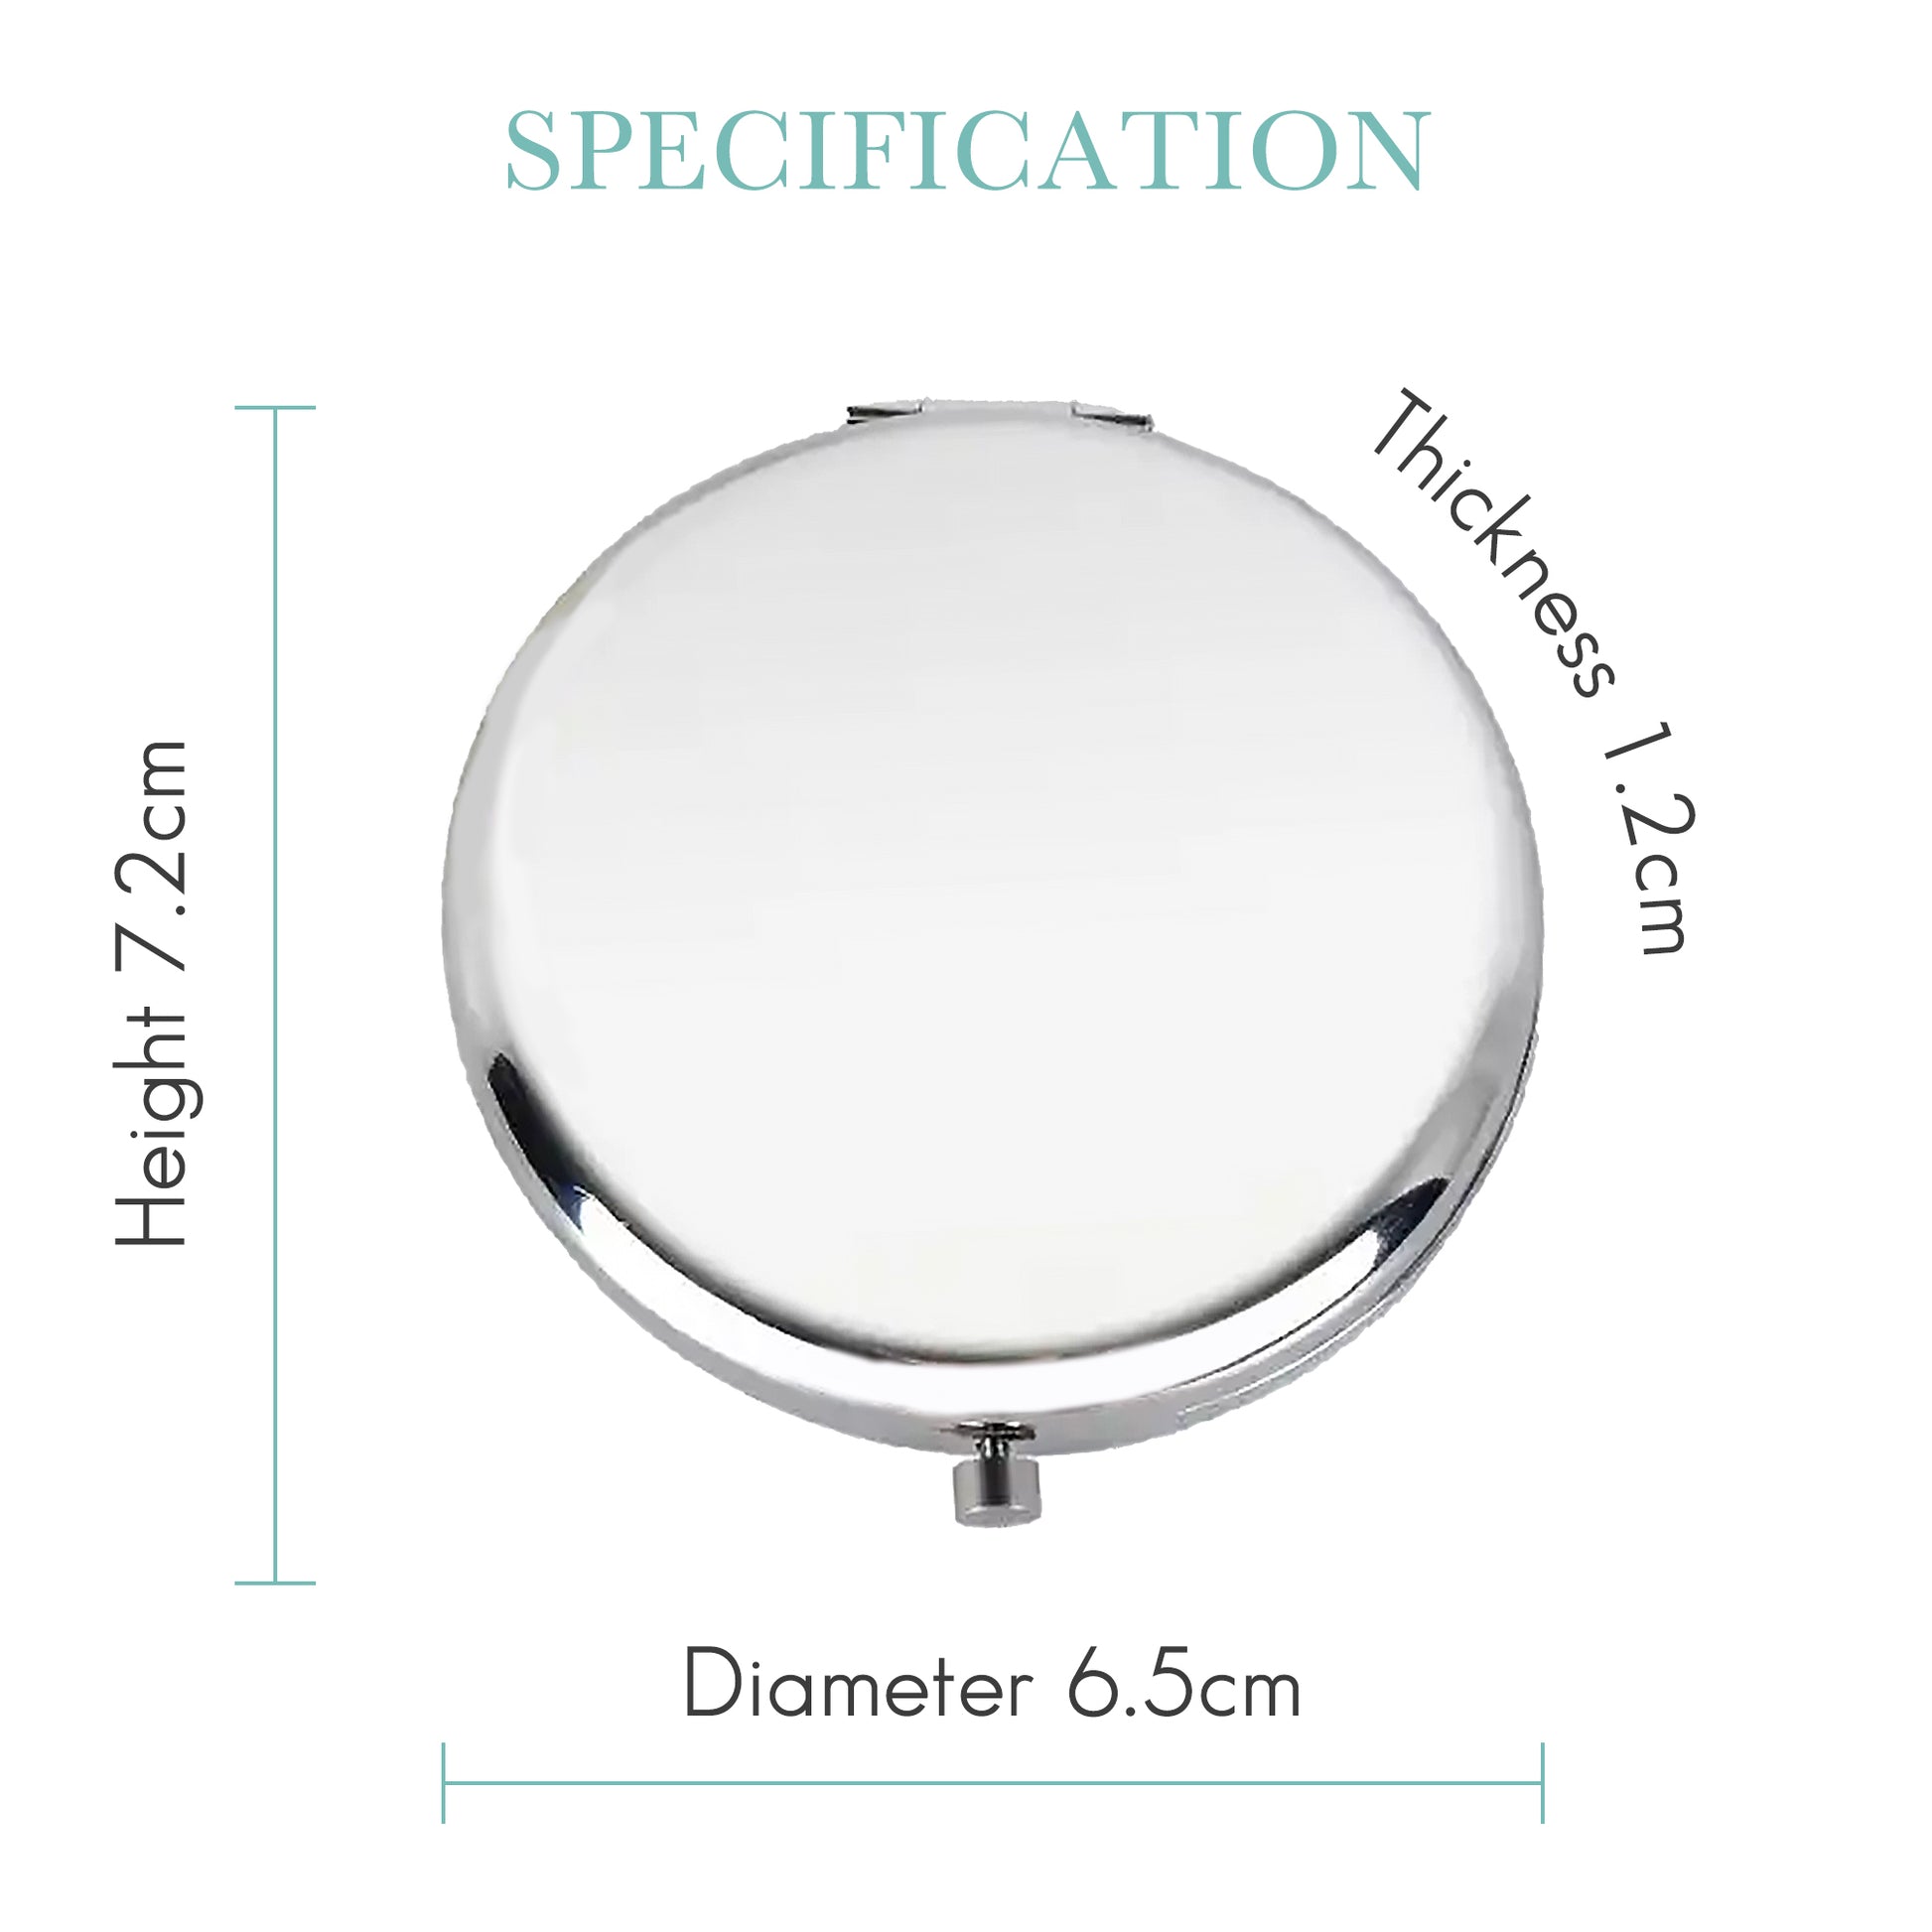 customised compact mirror specification